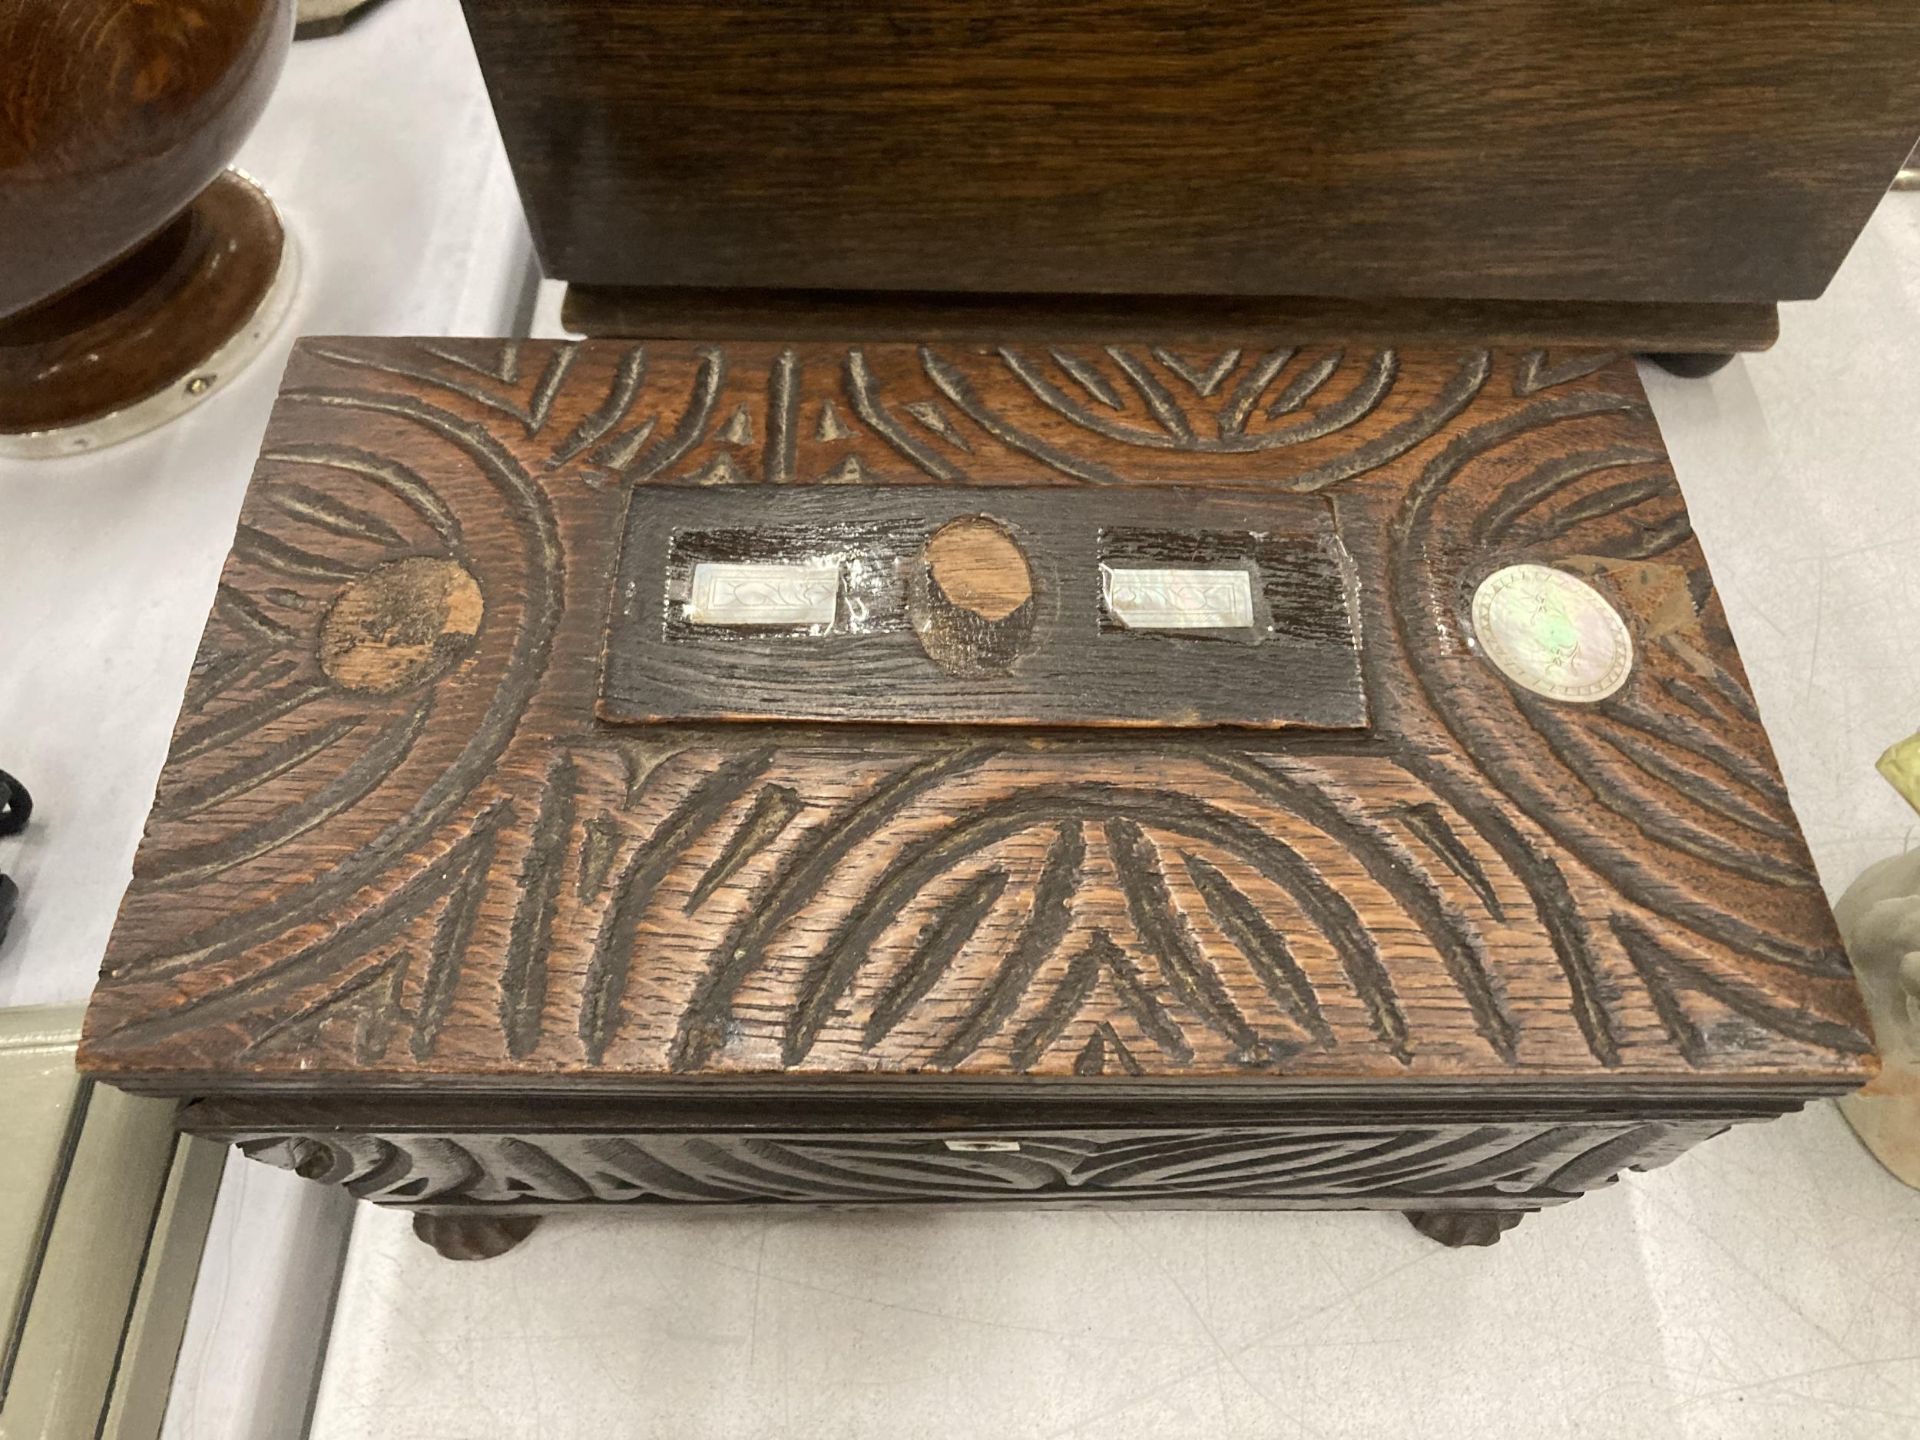 A GEORGIAN CARVED WOODEN TEA CADDY BOX - Image 2 of 4